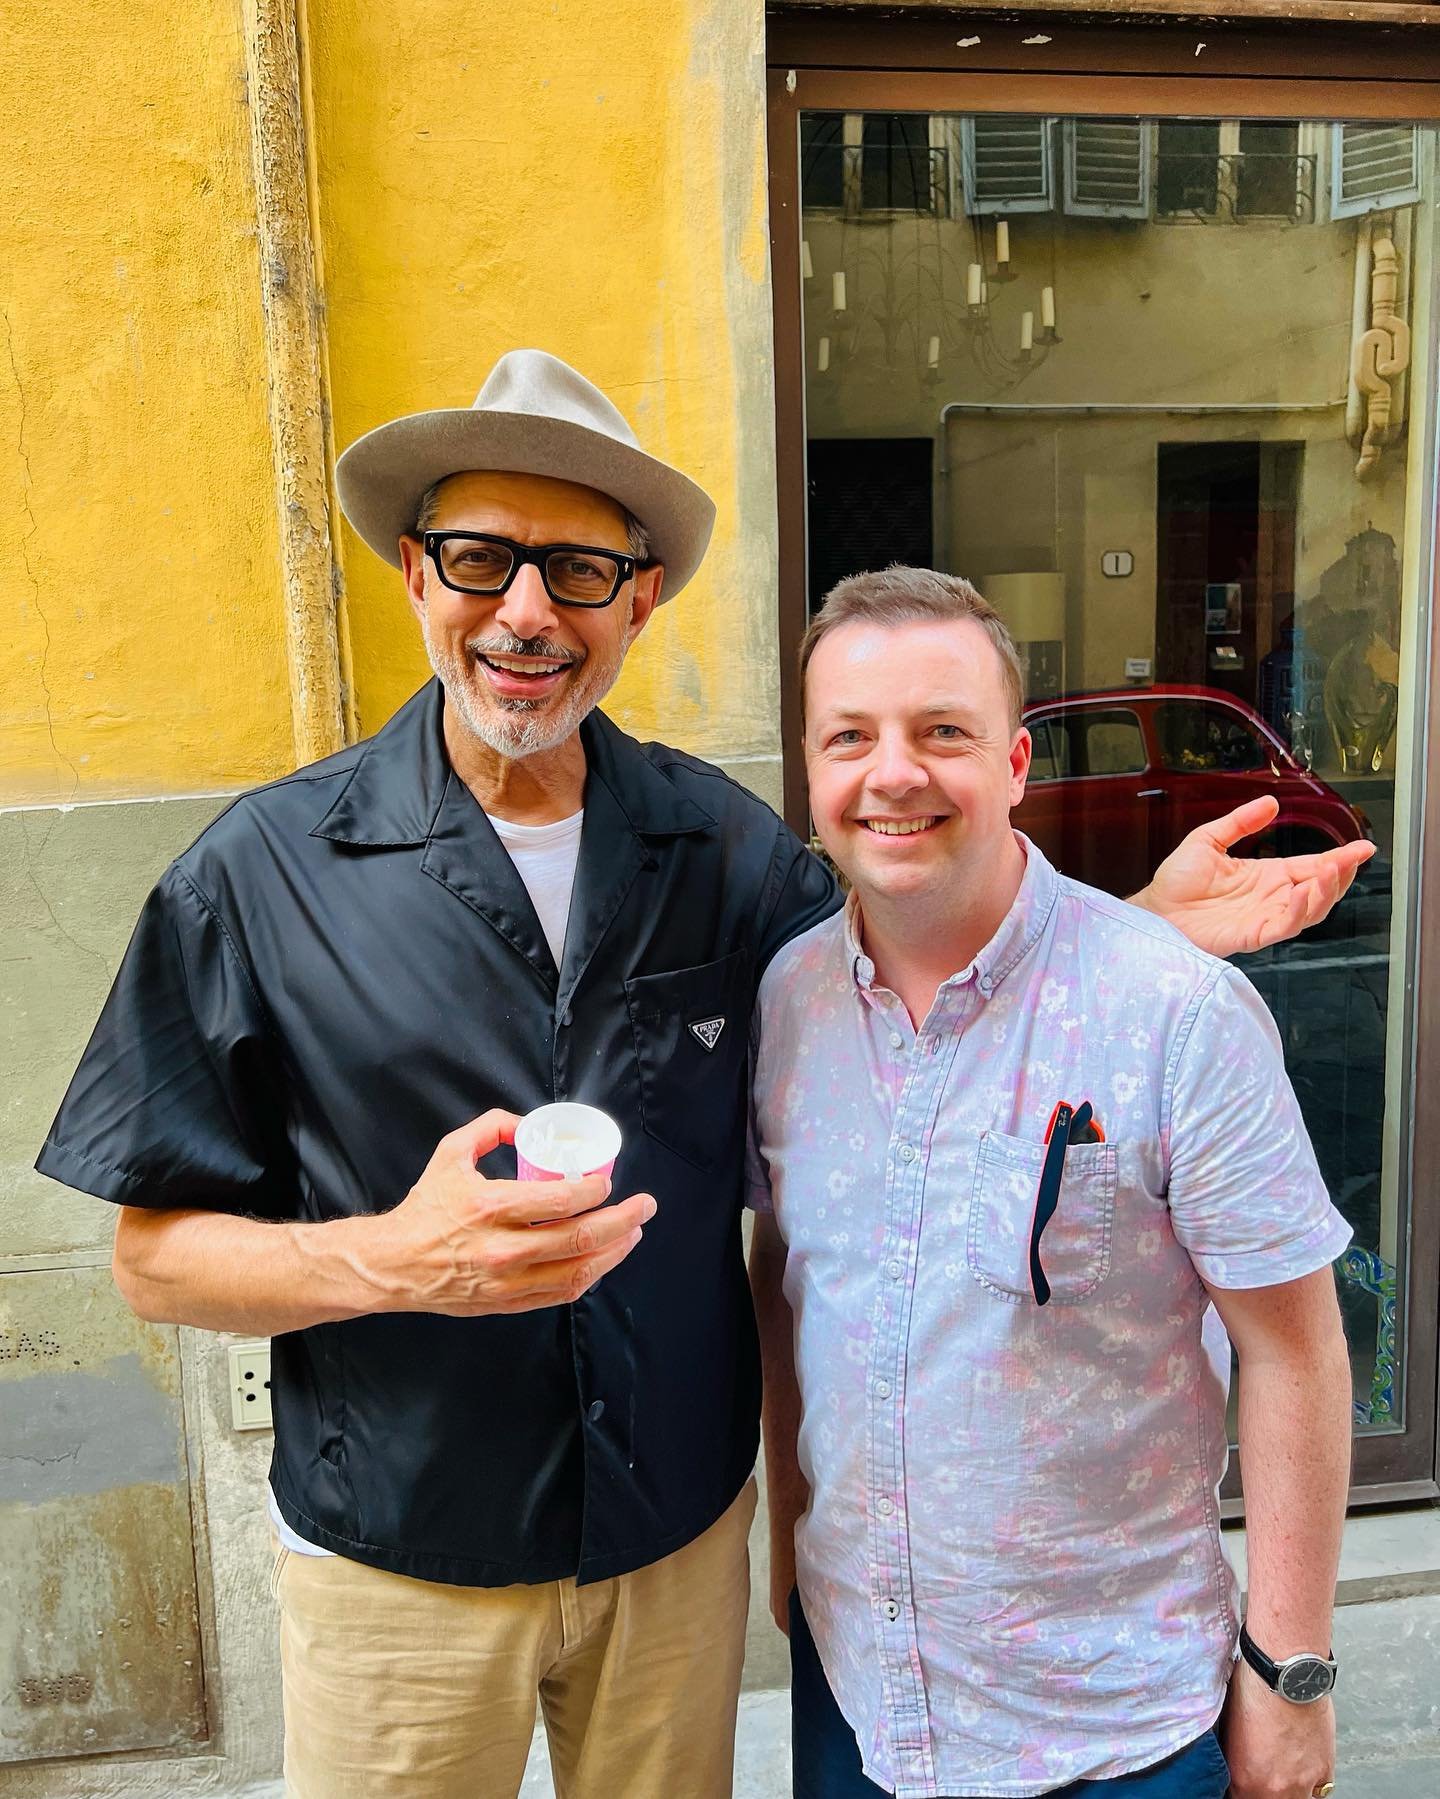 On a quiet street where old ghosts meet&hellip; You never know who you&rsquo;ll bump into in Florence. And yes the voice of @jeffgoldblum is even more tuneful and melodious in person. Also, he&rsquo;s never been to Ireland. Over to you, @tourismirela